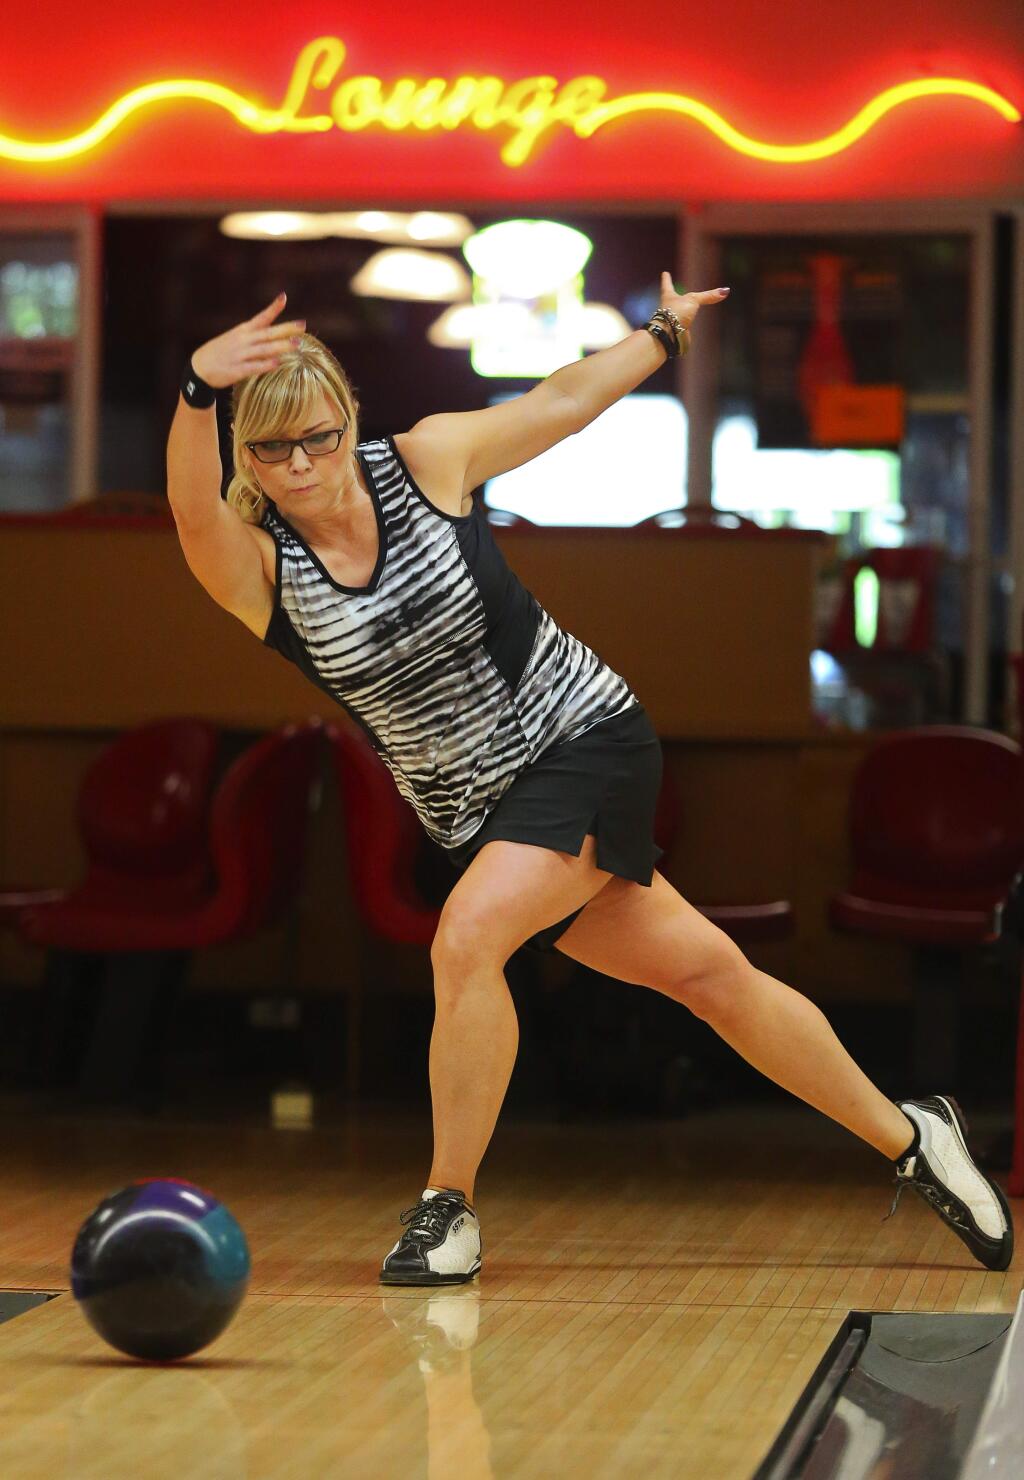 Julie Yokoyama bowls at Double Decker Lanes in Rohnert Park, on Friday, April 29, 2016. Yokoyama is entered to compete in the Nationwide PWBA Sonoma County Open on May 5-8.(Christopher Chung/ The Press Democrat)